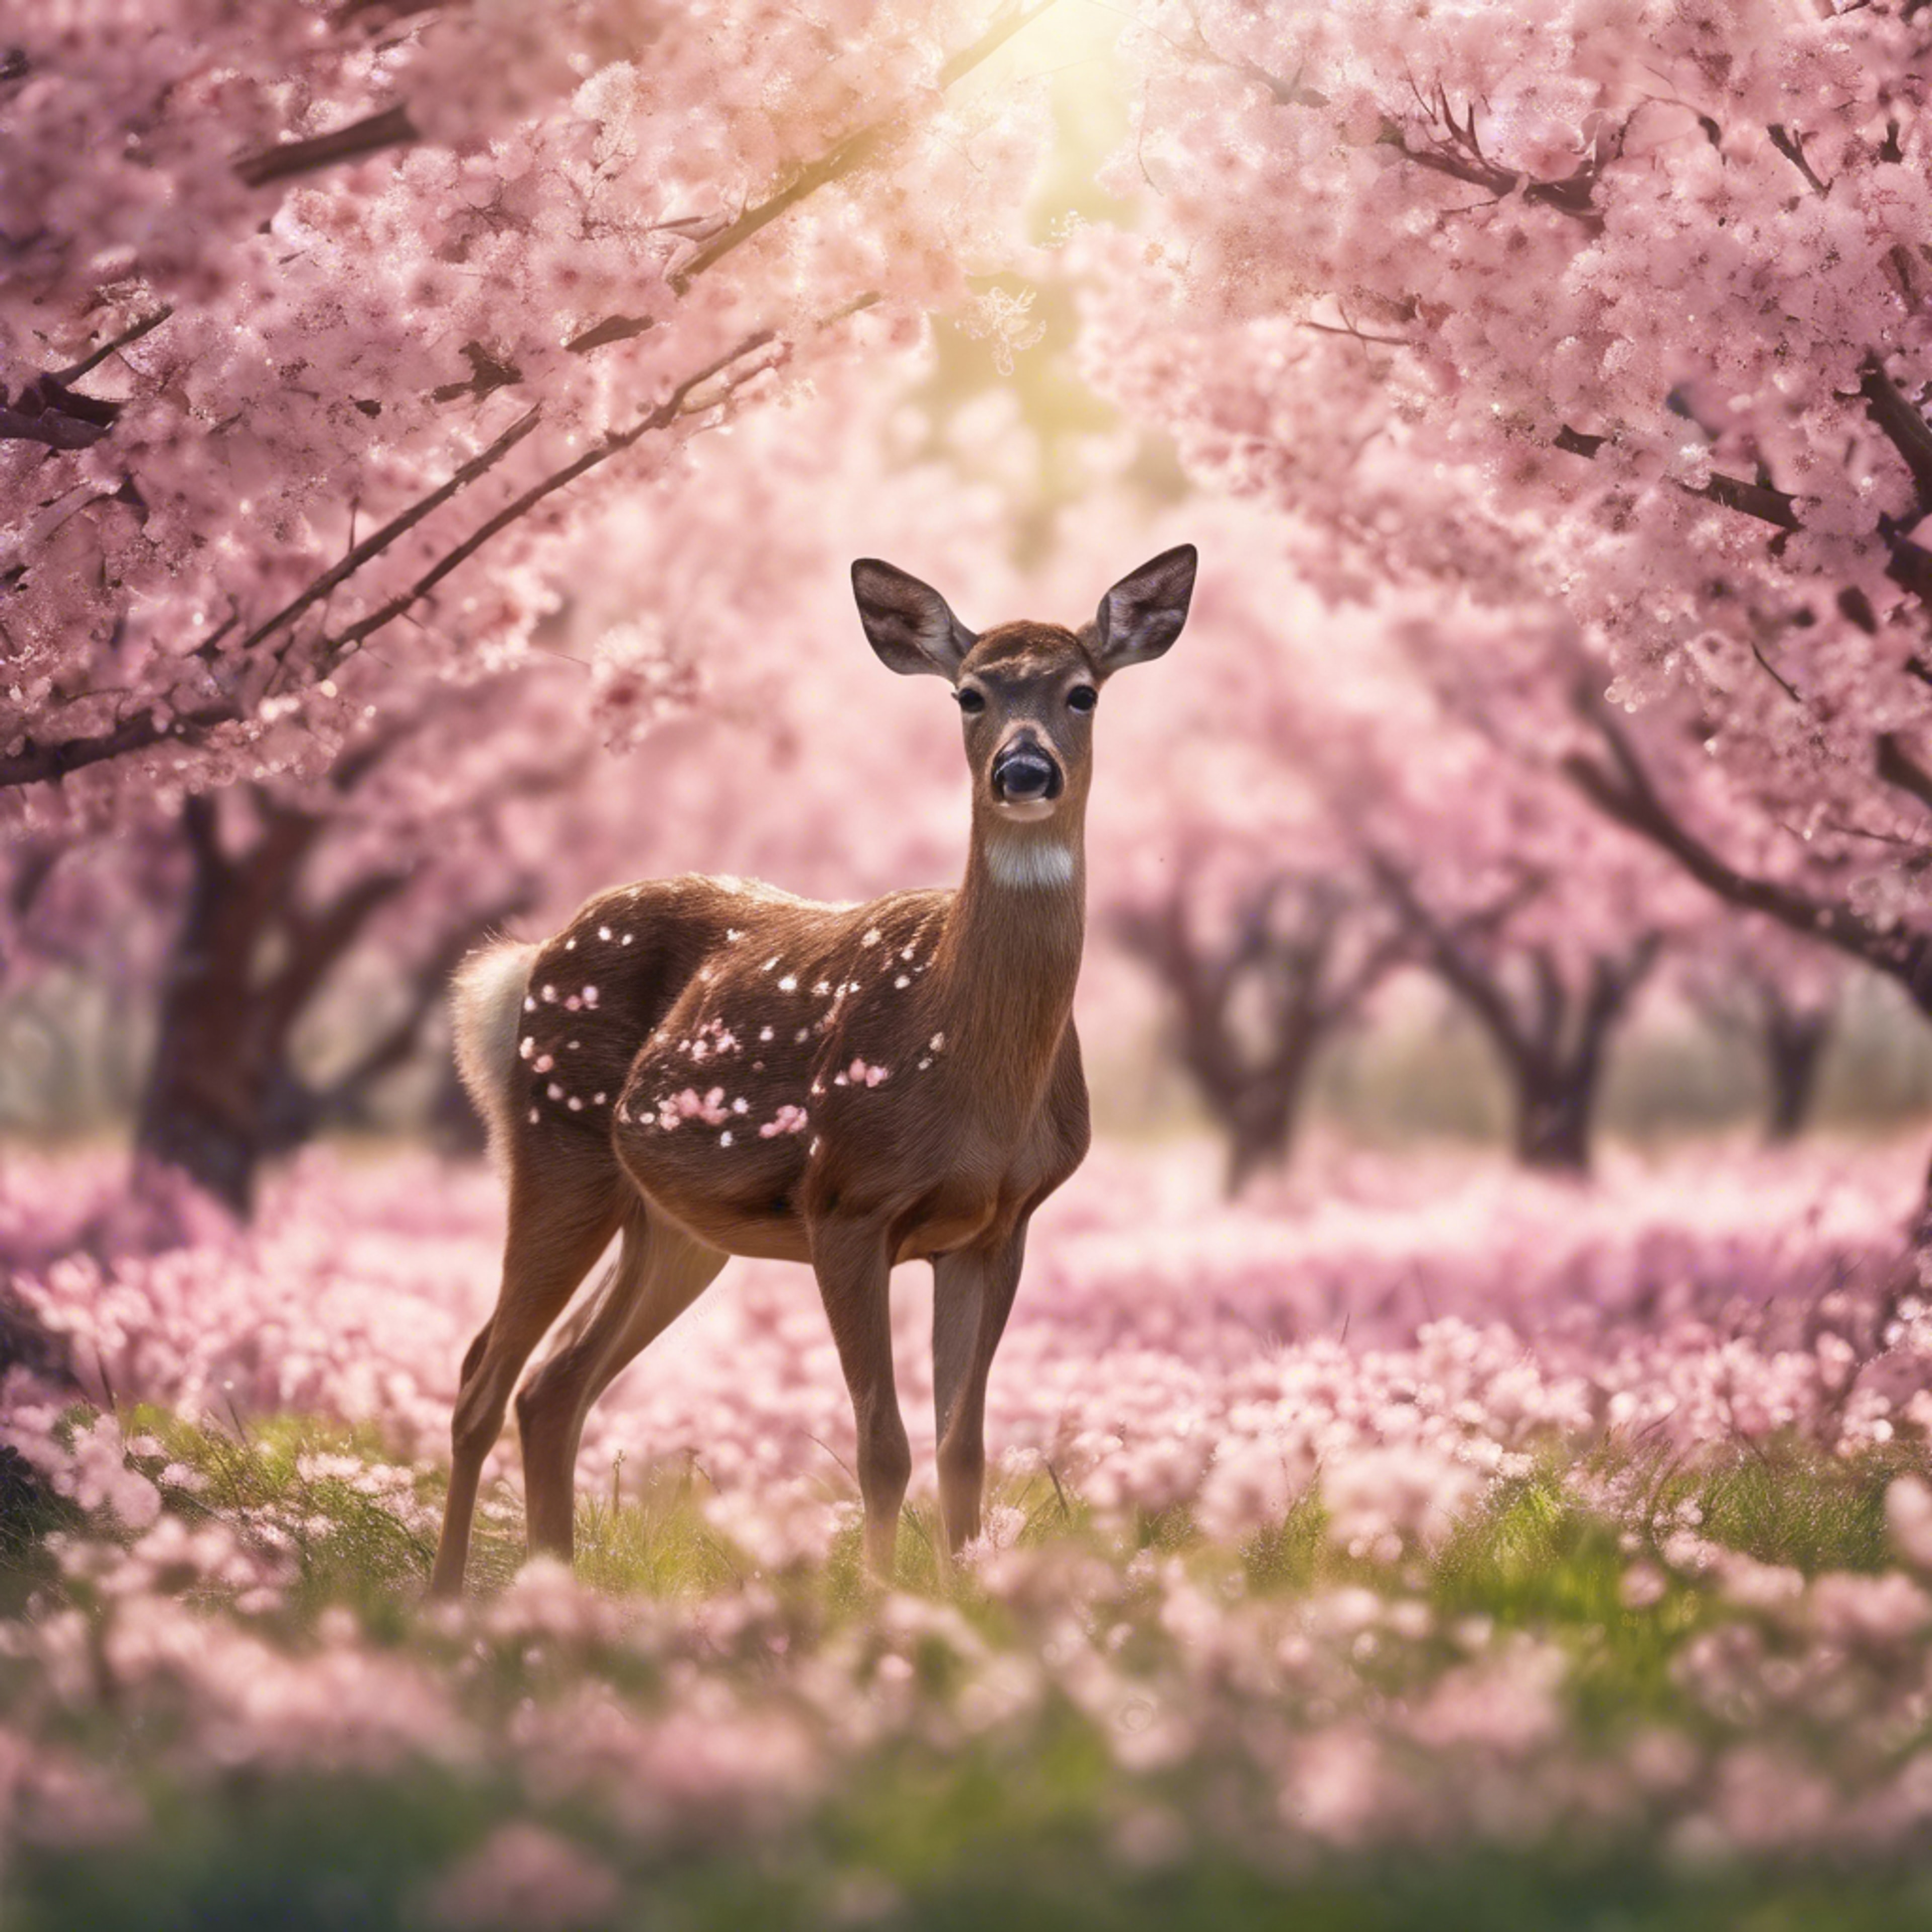 An illustration of a young deer grazing in a field of blooming cherry trees. Обои[a2b025554c3c4b6aabc3]